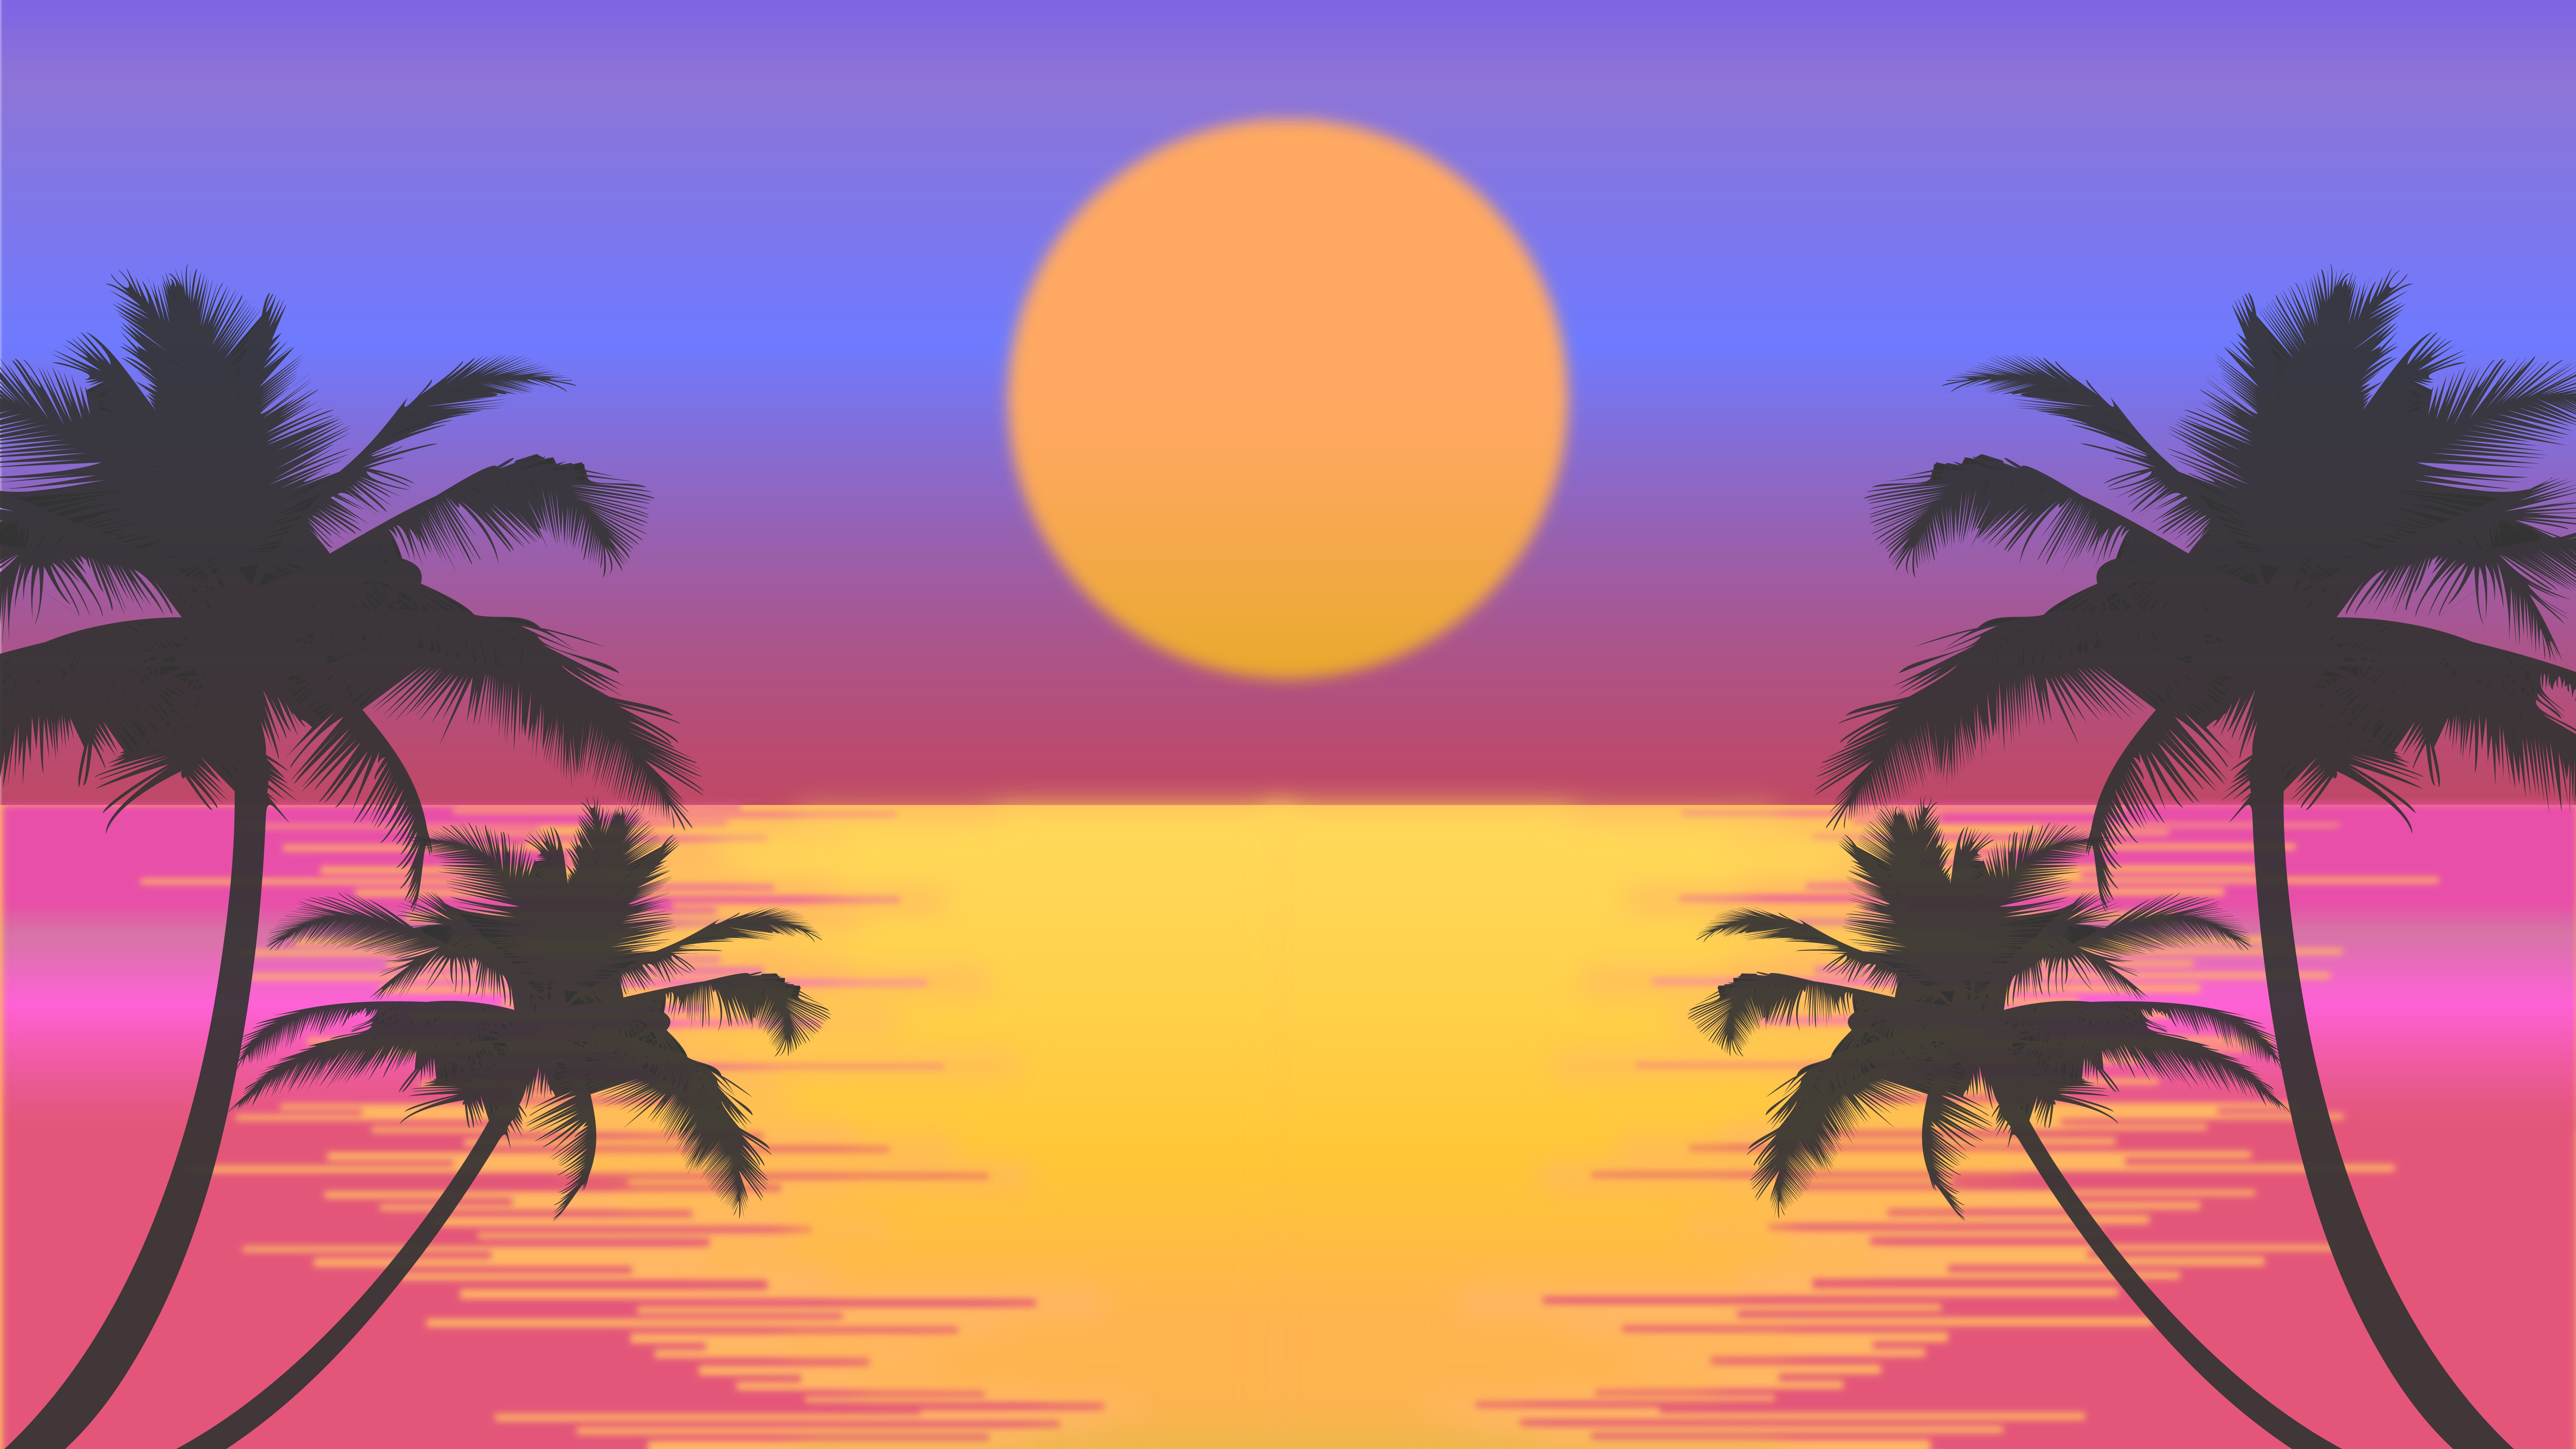 Retro Sunset Reflection on Water by Top_Notch_Vectors